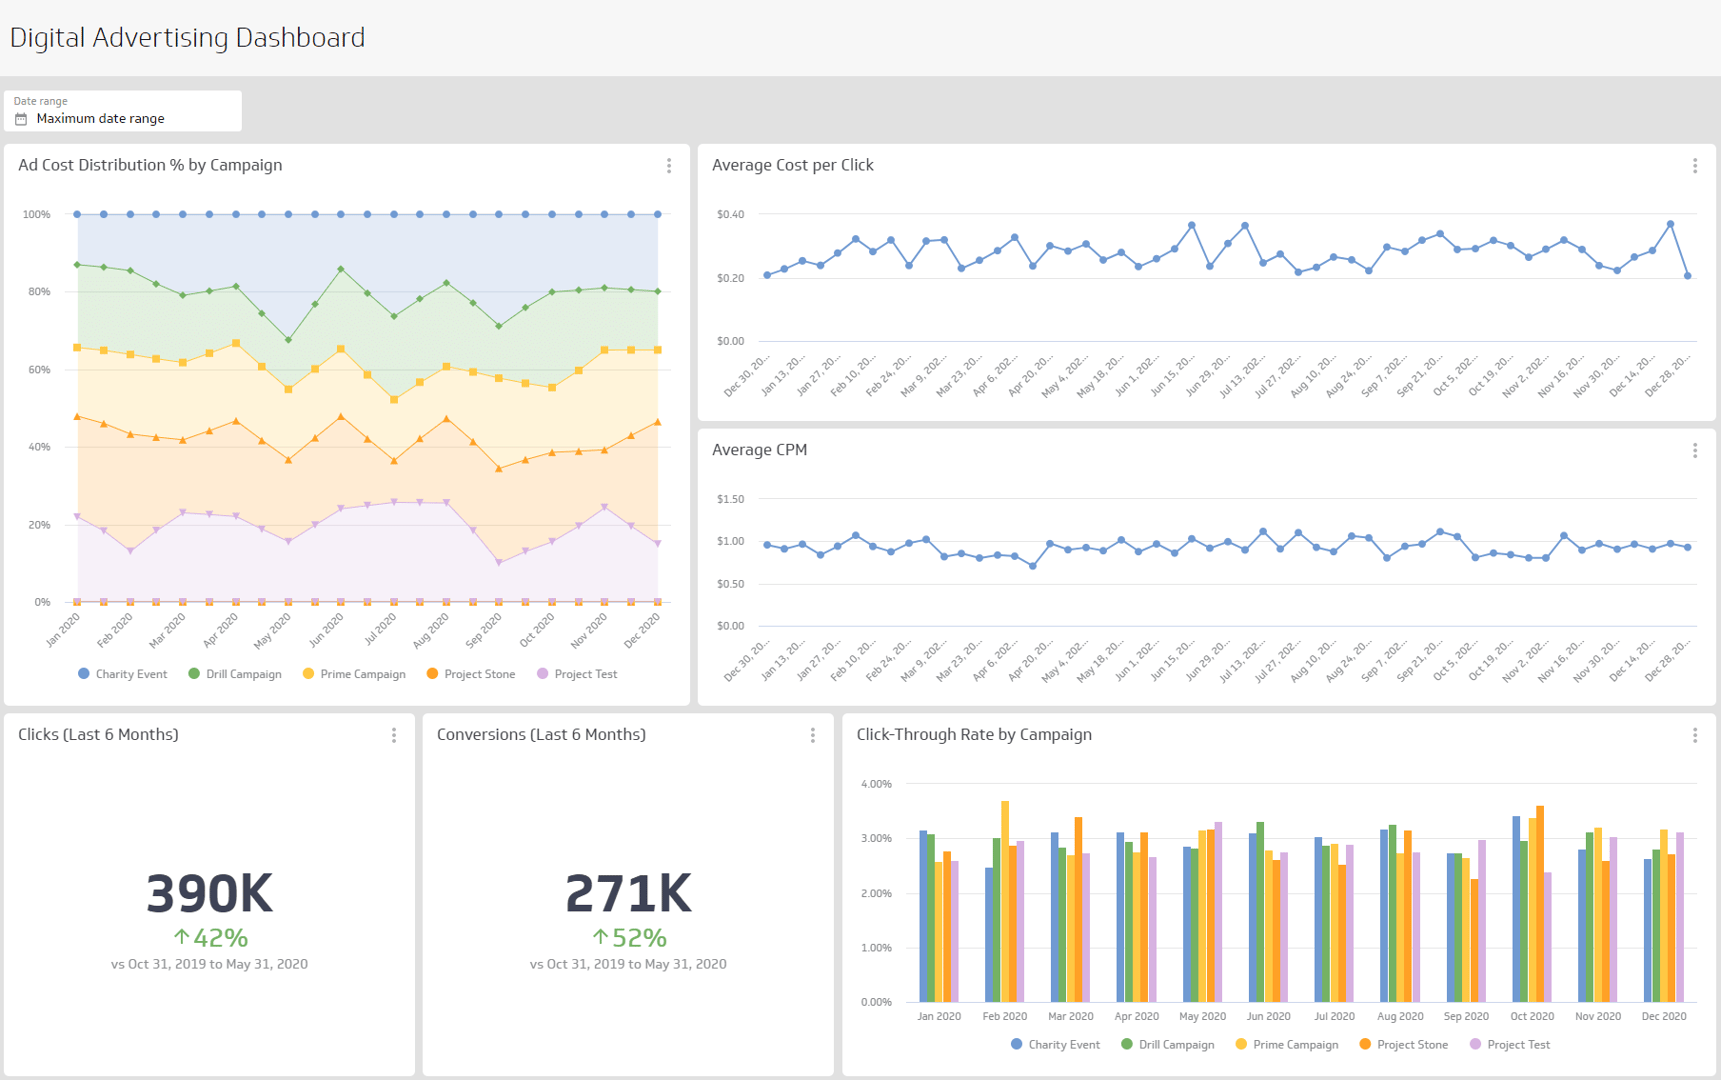 Related Dashboard Examples - Digital Advertising Dashboard